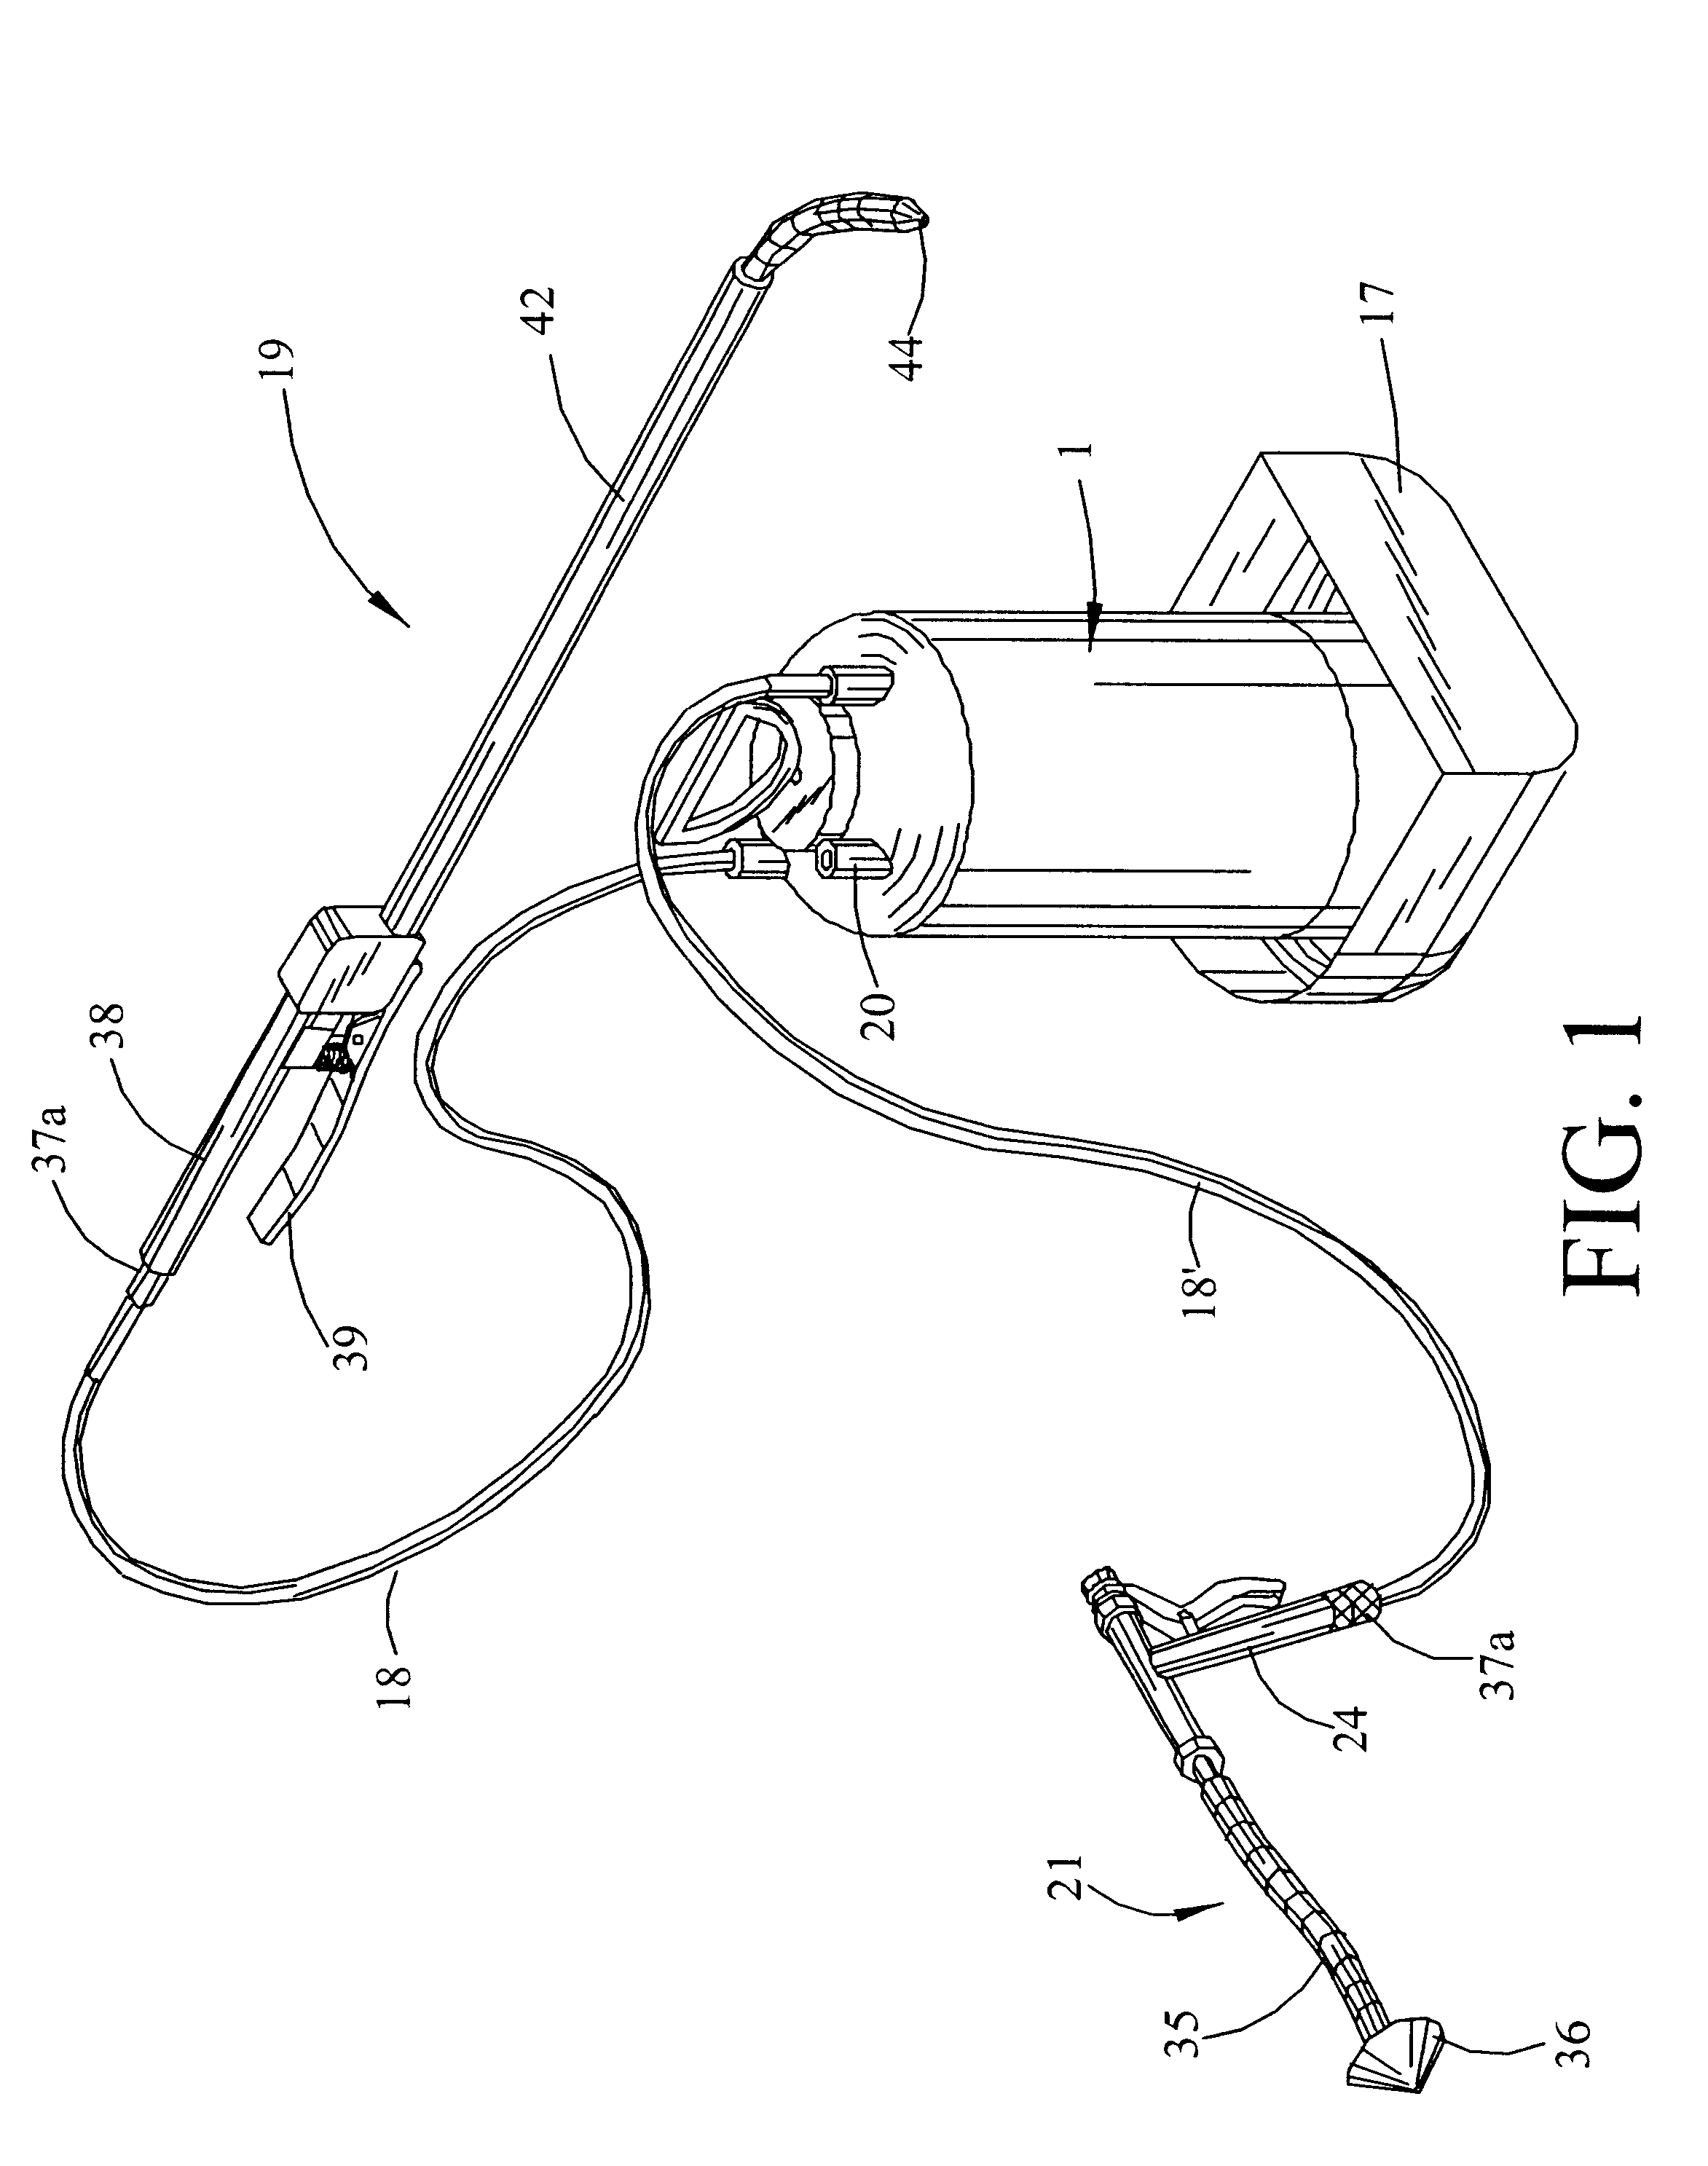 Multi-mode fluid injection system